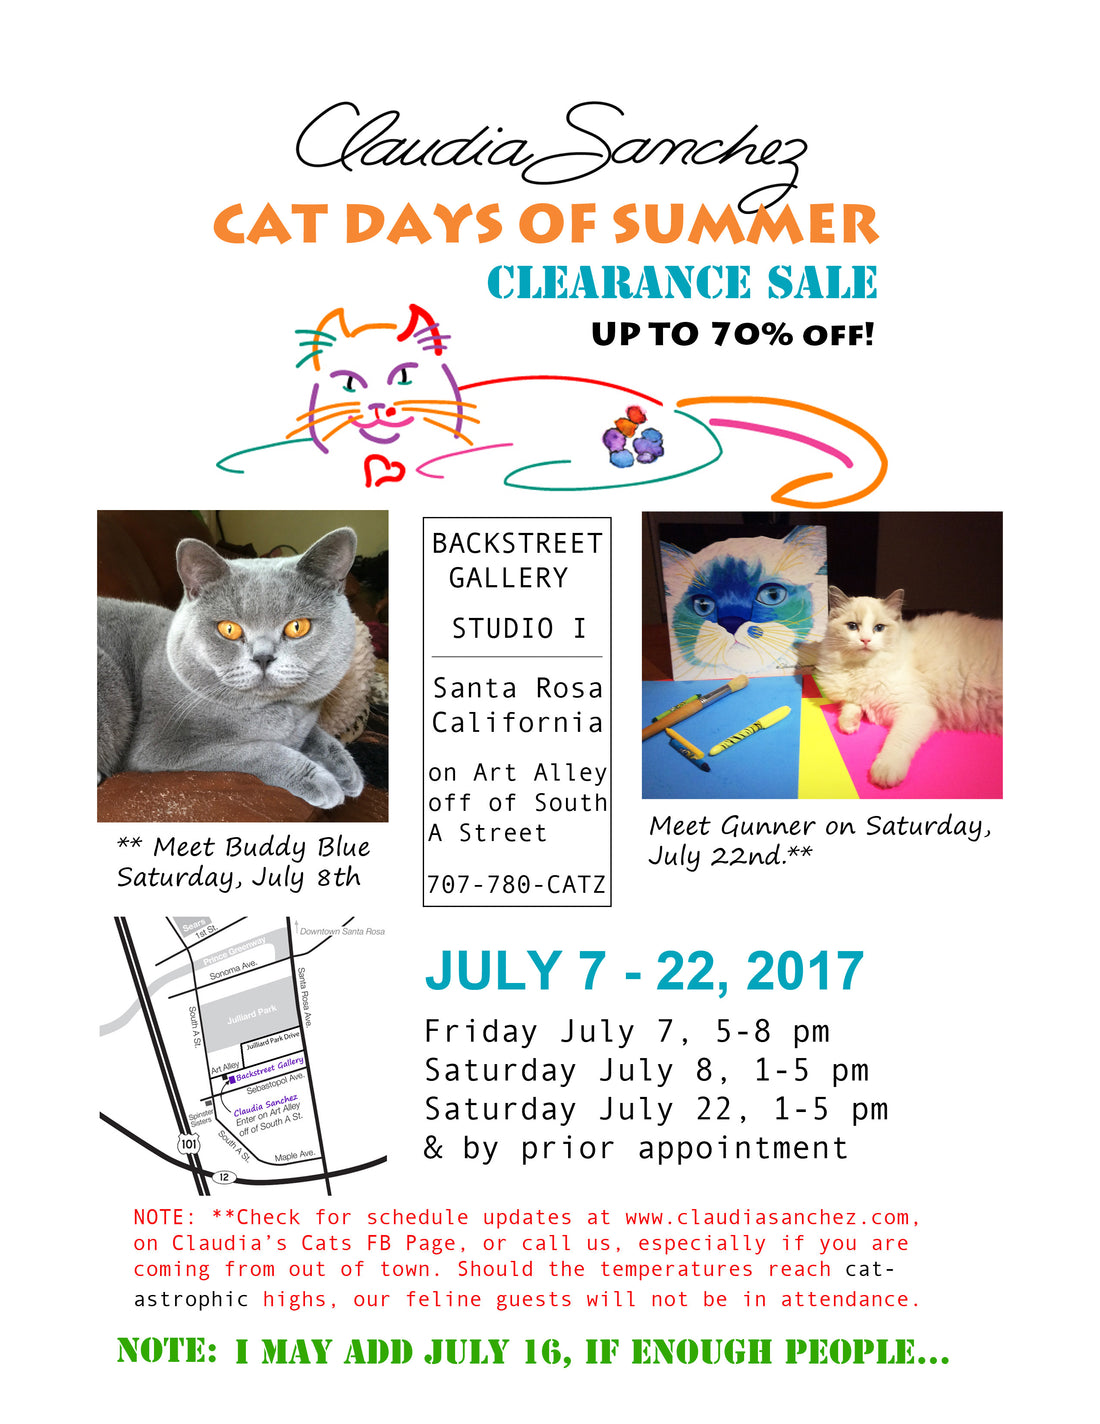 IT IS A GO!  Cat Days of Summer Art Show/Clearance Sale - July 7 -22